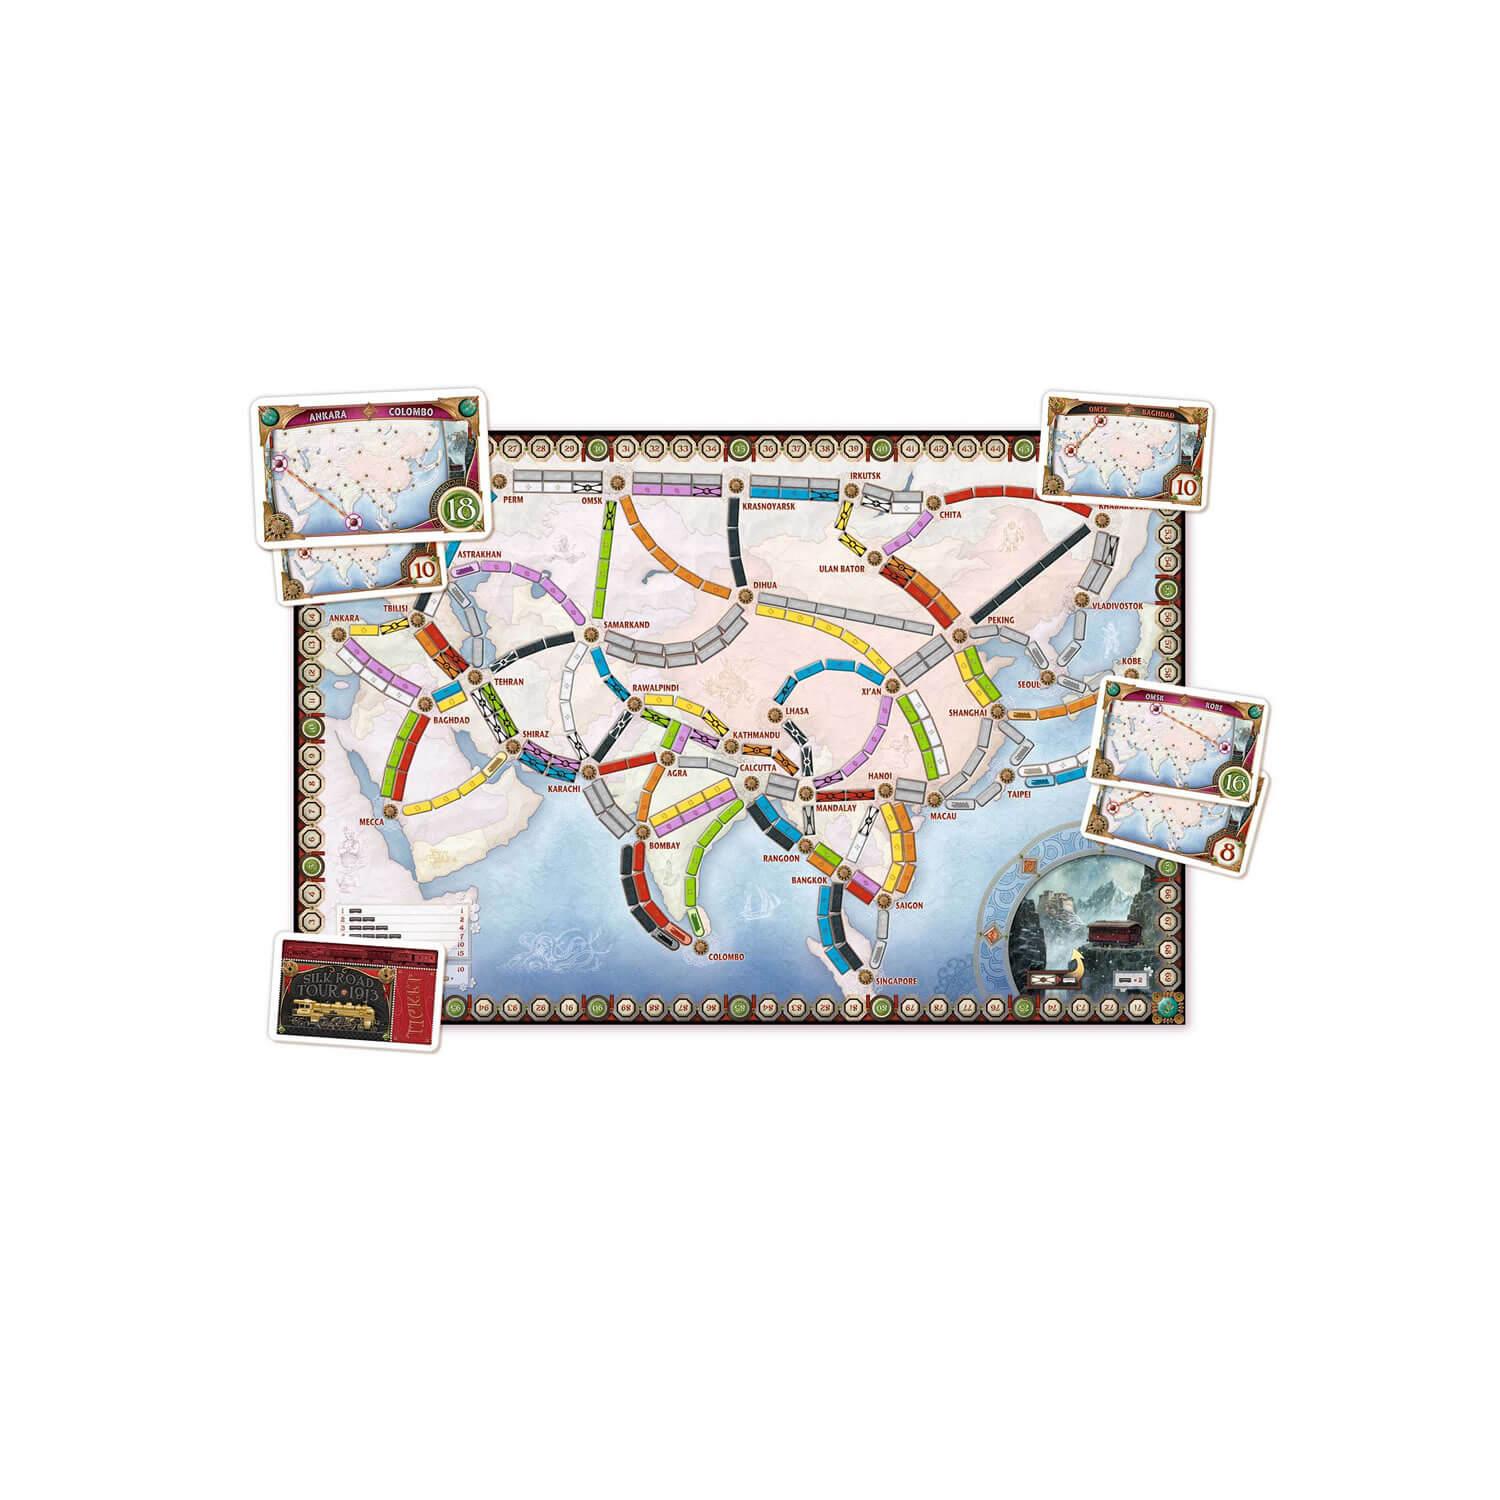 Ticket to Ride Map Collection: Asia